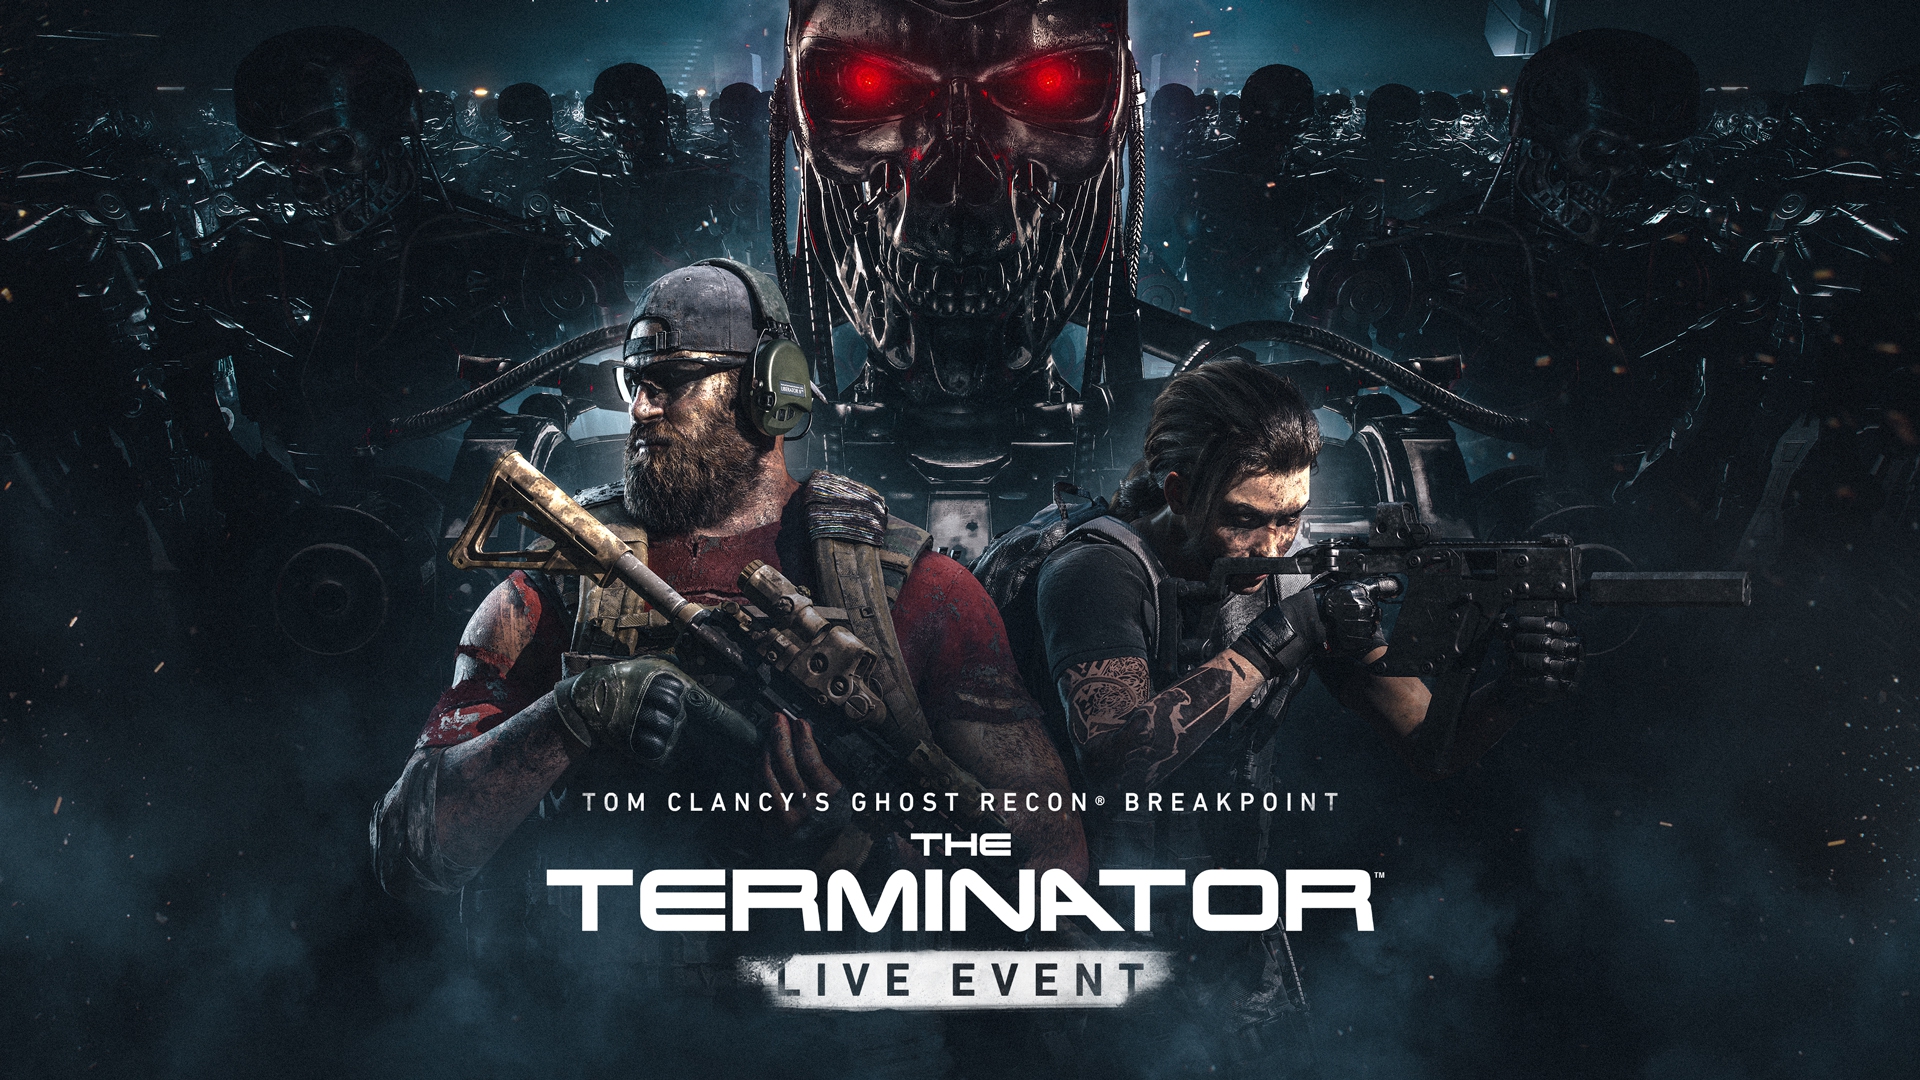 Ghost Recon Breakpoint The Terminator